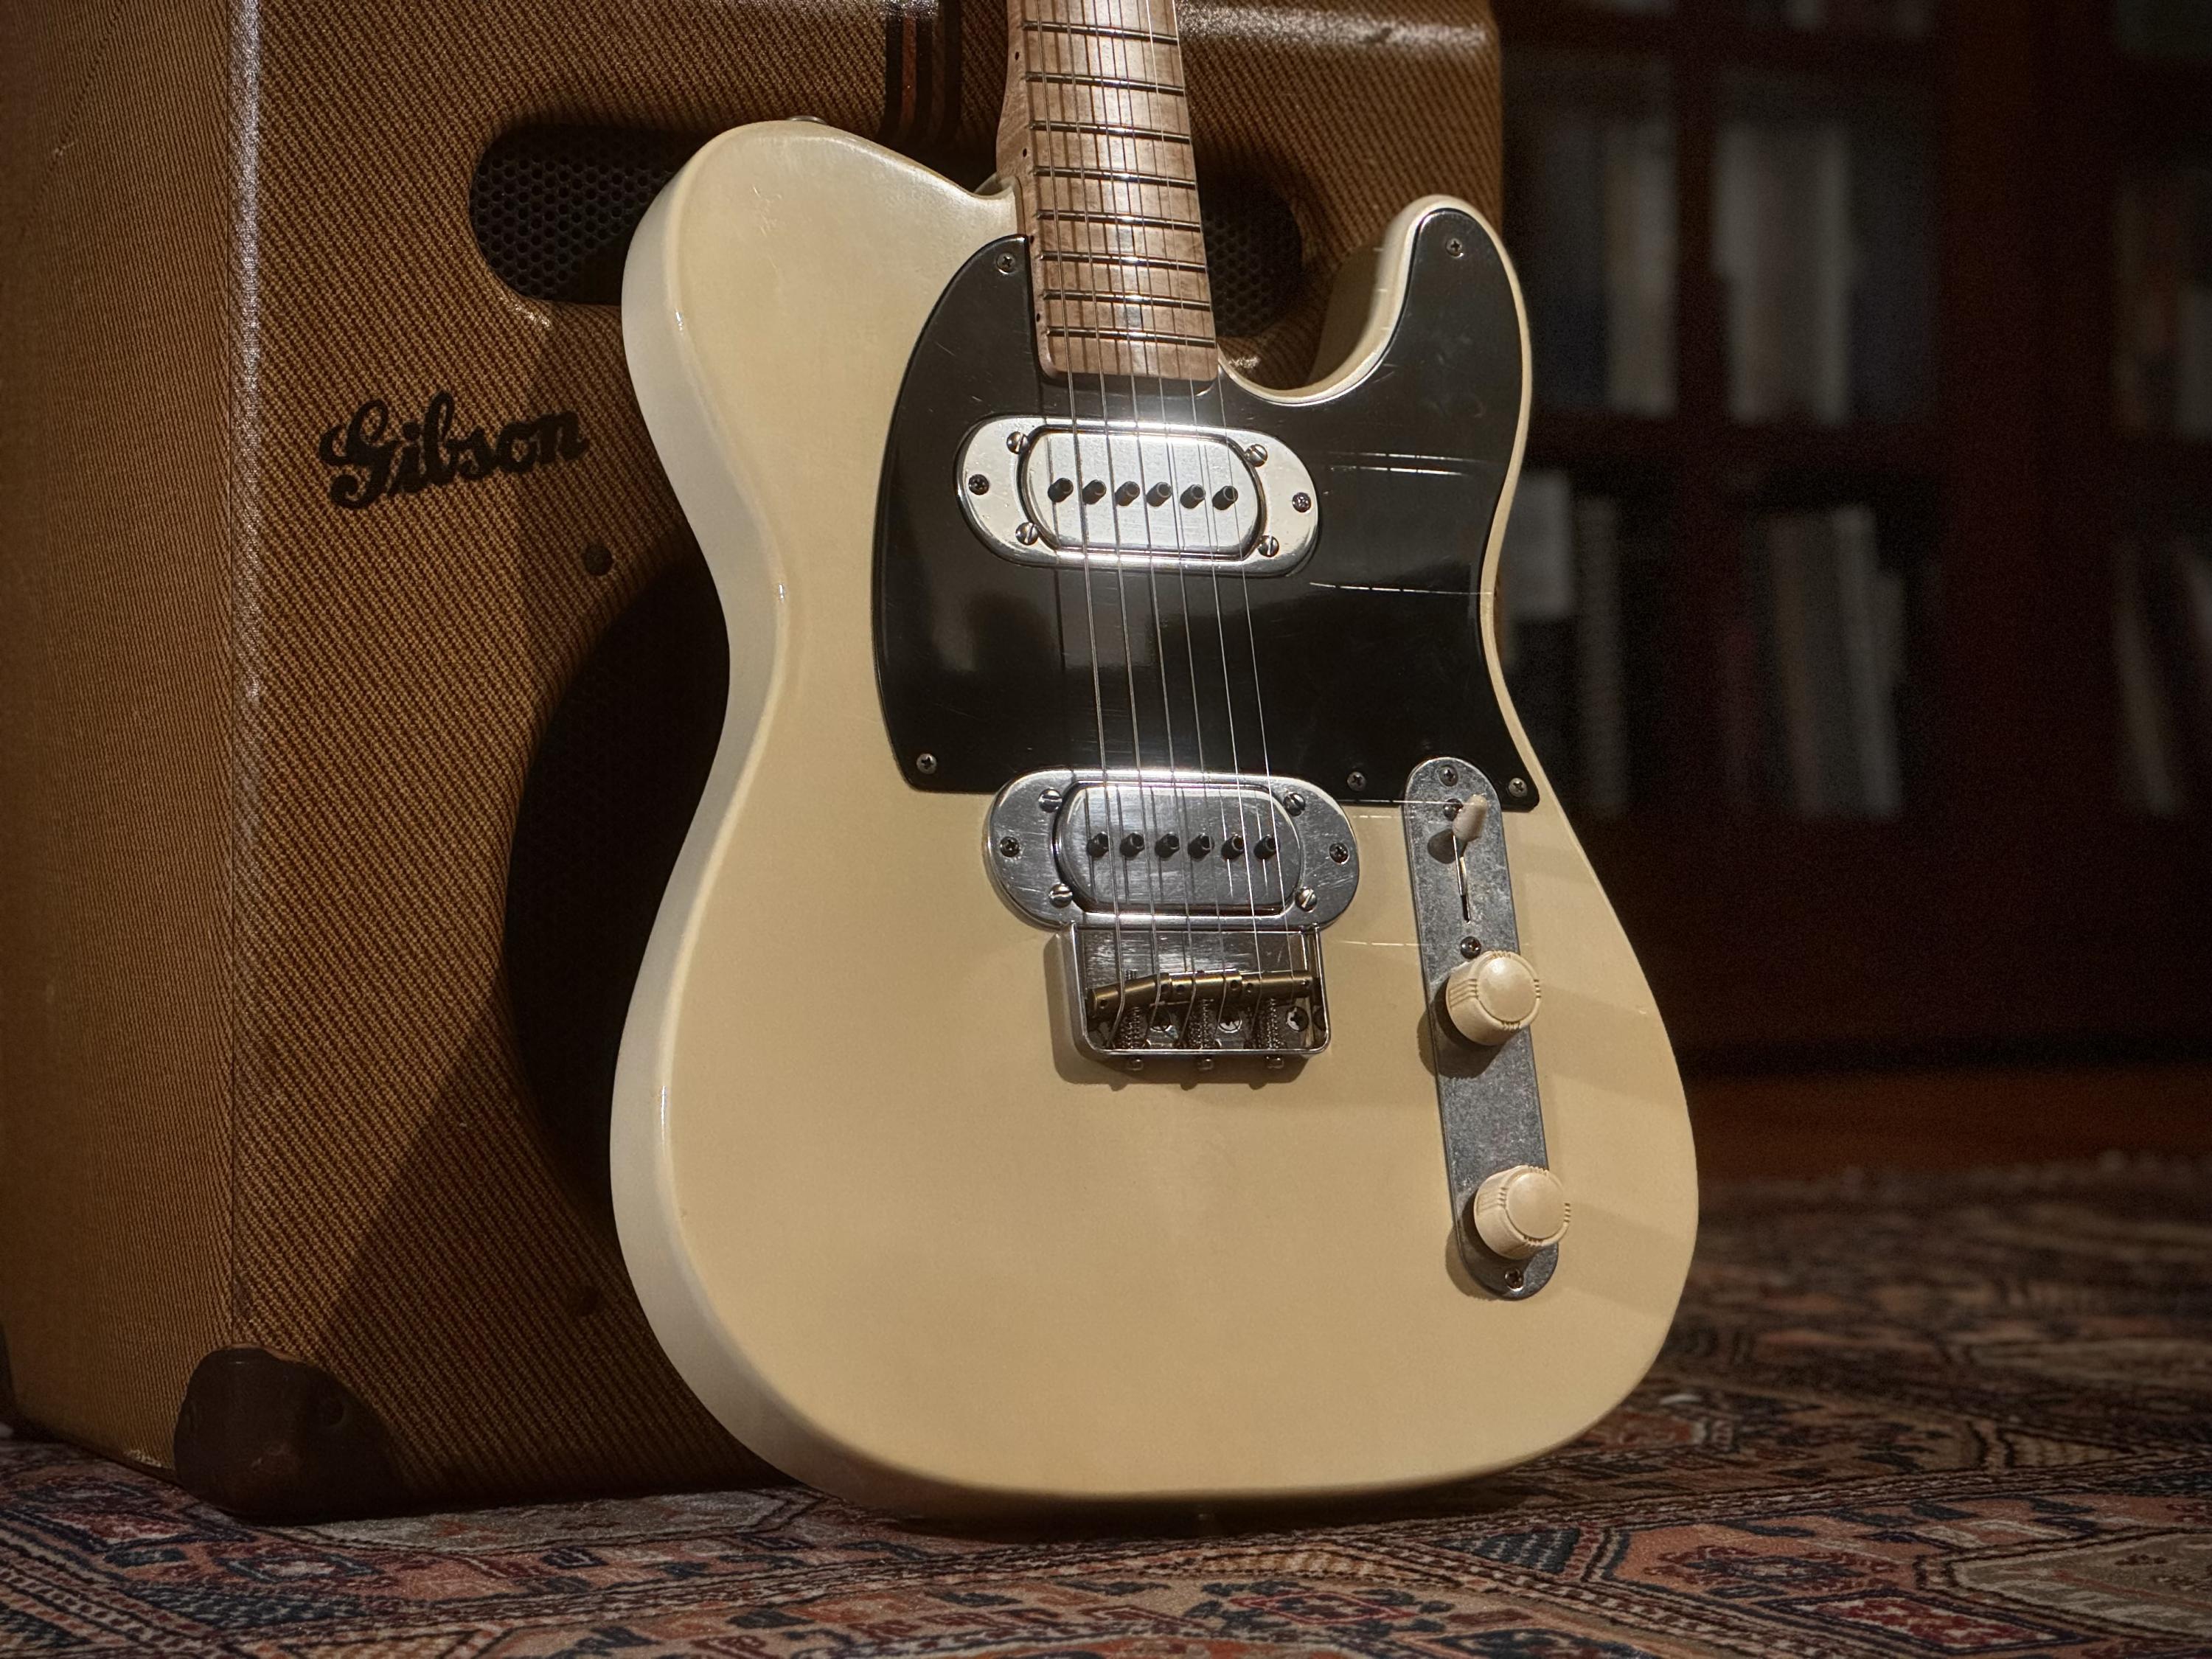 Telecaster Love Thread, No Archtops Allowed-img_9666-jpg